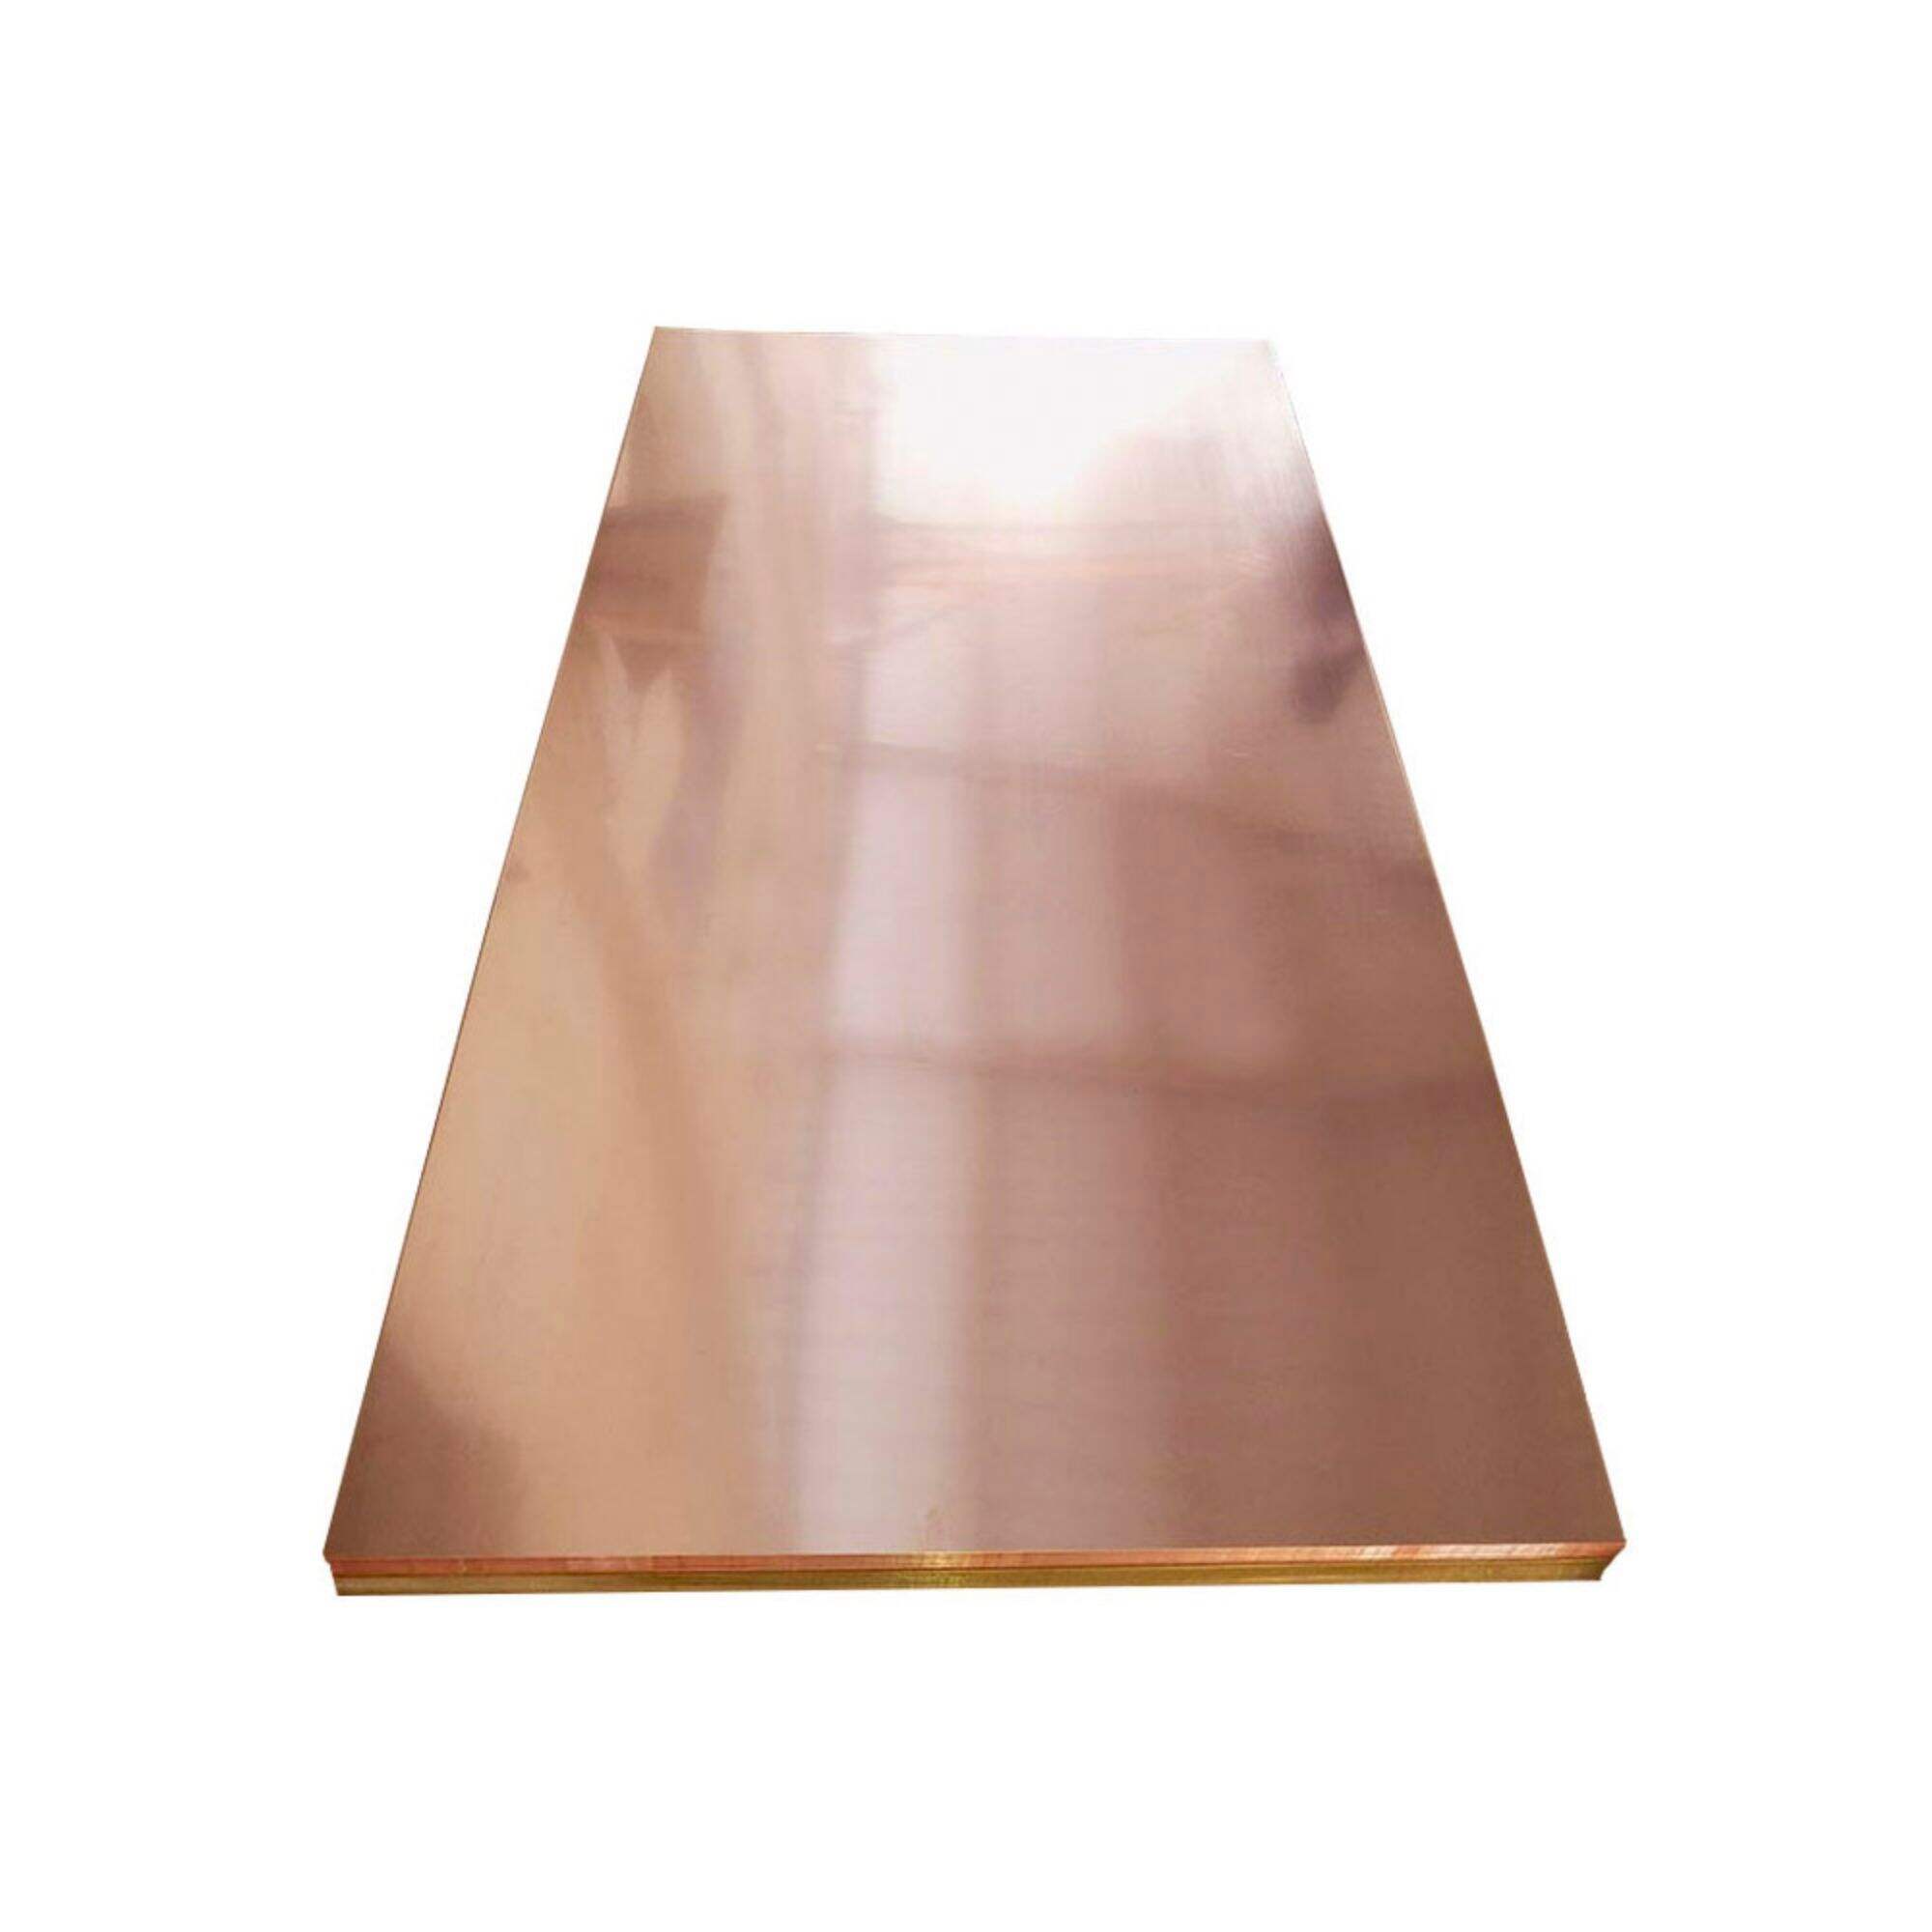 c17500 c10100 c11000 5mm 10mm thick copper sheet plate